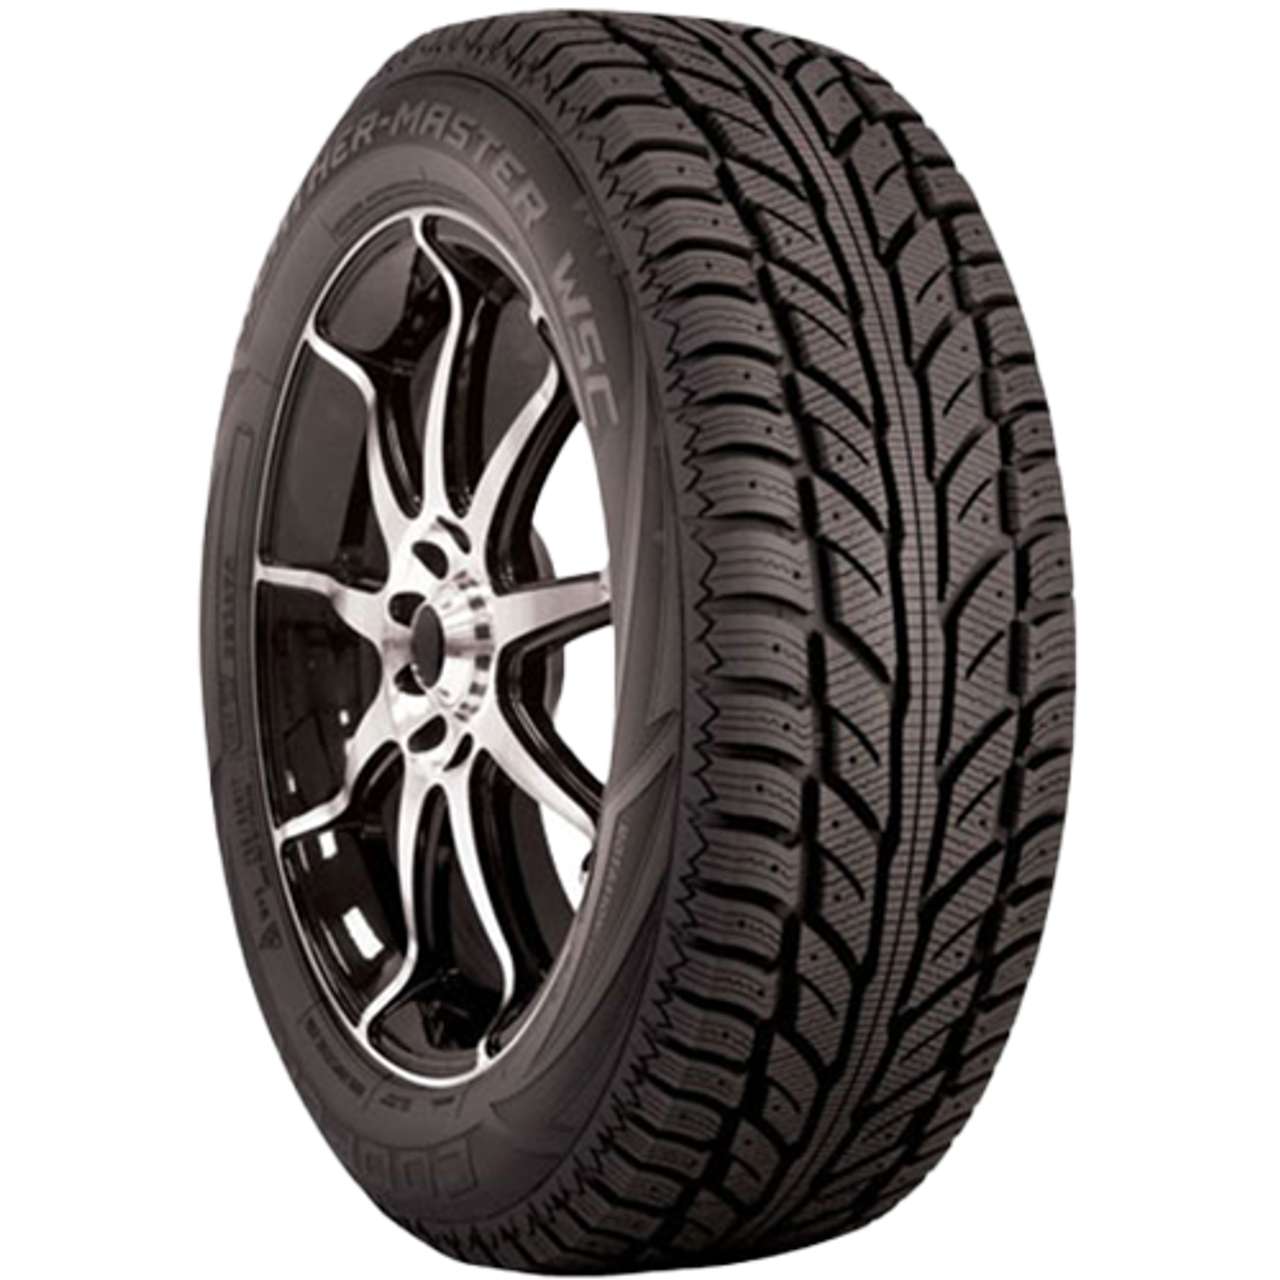 COOPER WEATHERMASTER WSC 265/70R16 112T STUDDABLE BSW